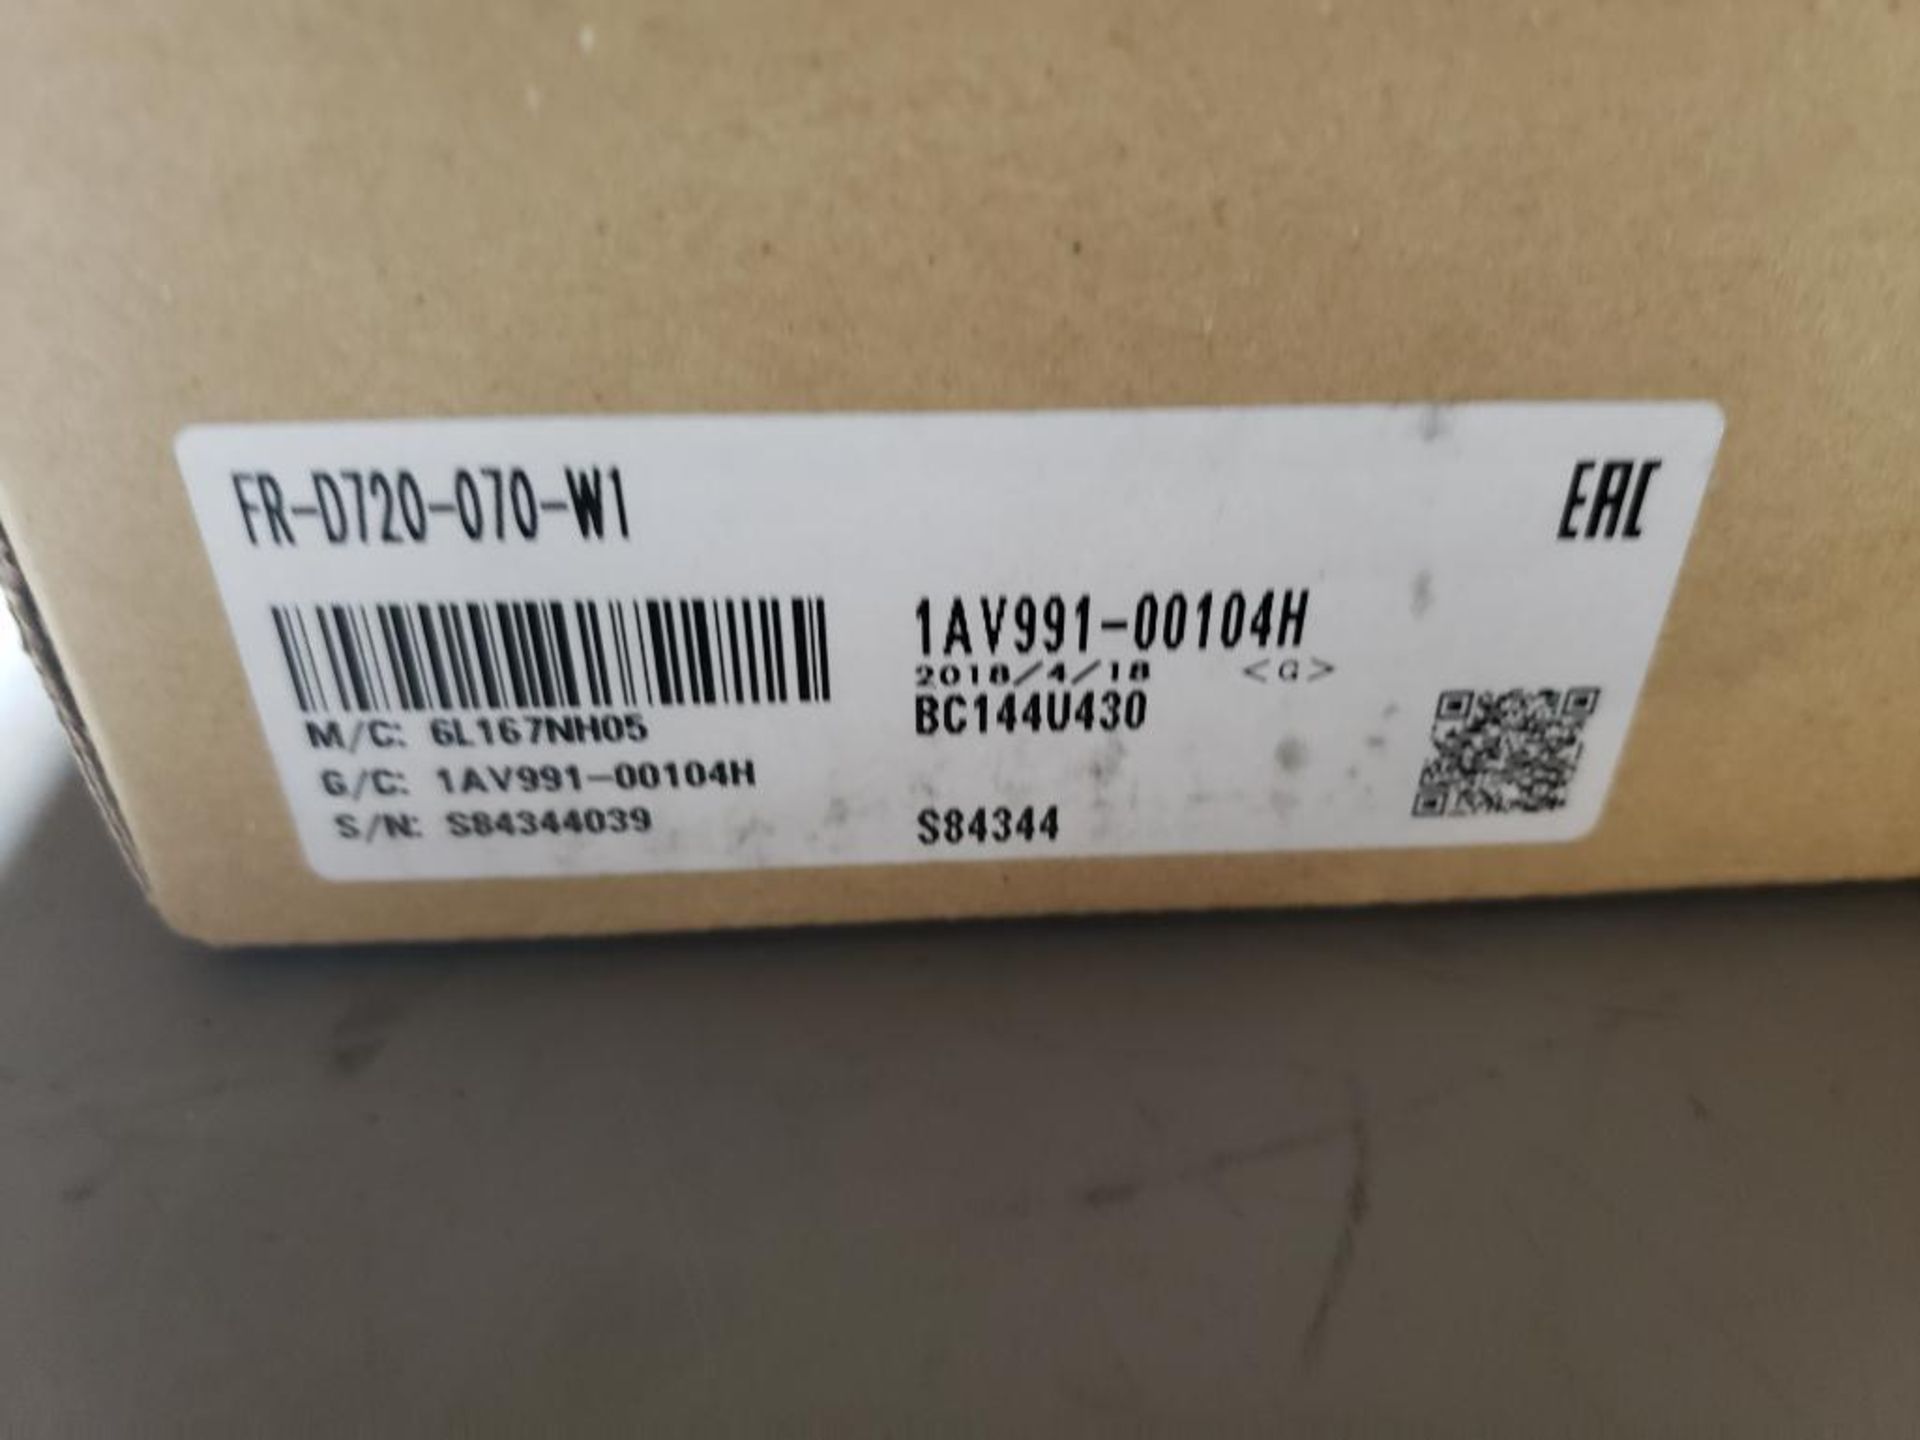 Mitsubishi inverter drive. Part number FR-D720-070-W1. New in box. - Image 3 of 3